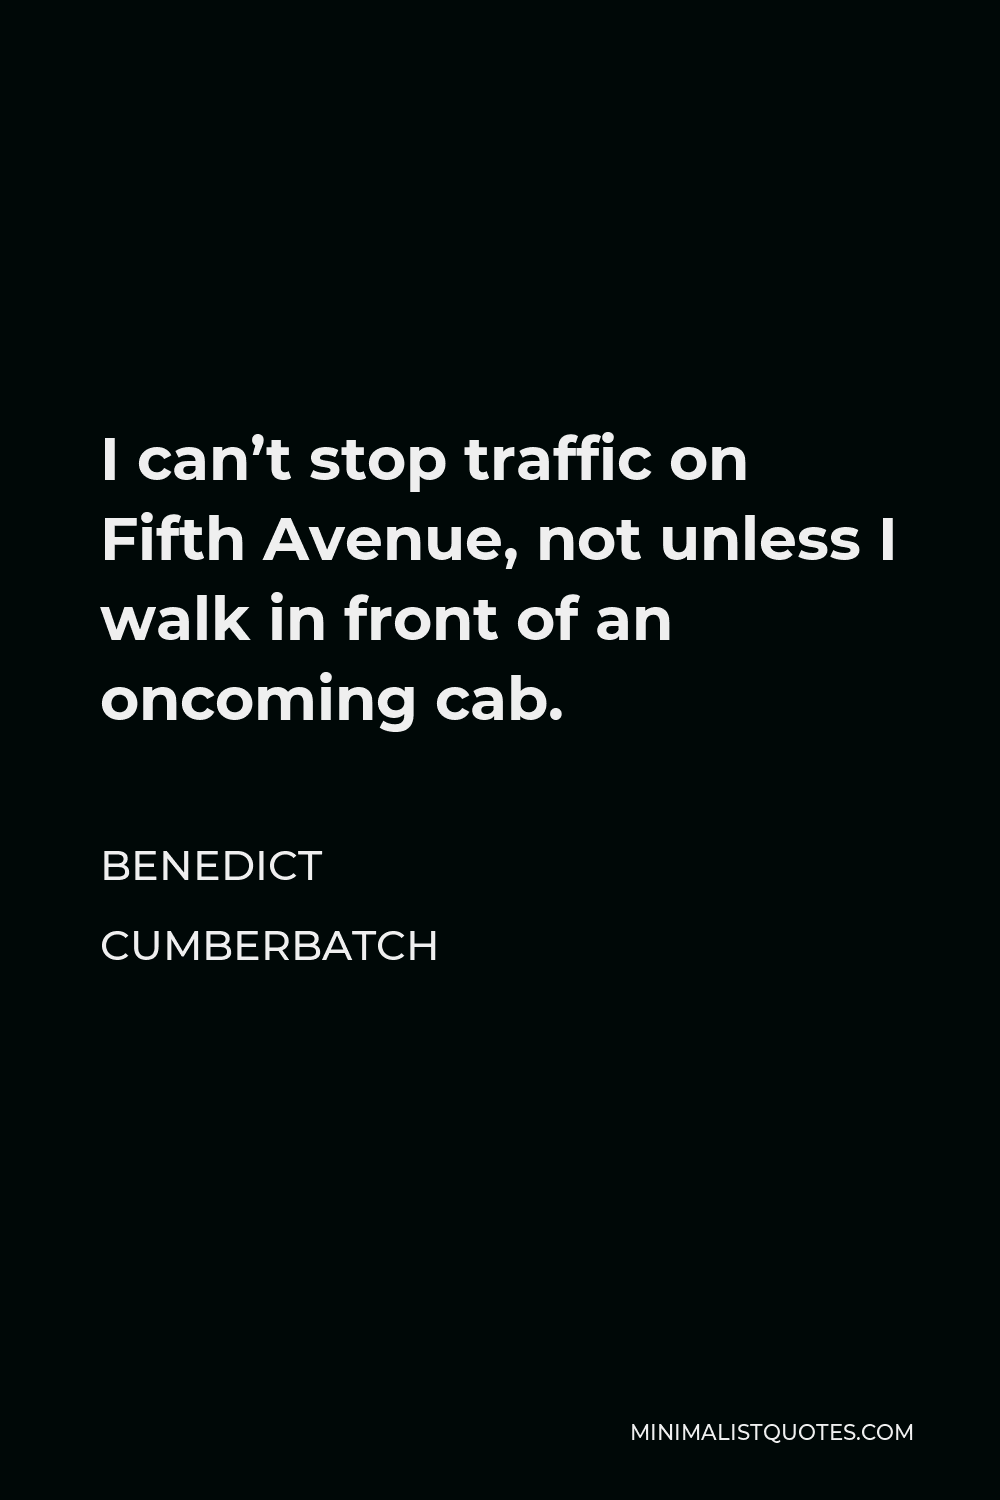 Benedict Cumberbatch Quote - I can’t stop traffic on Fifth Avenue, not unless I walk in front of an oncoming cab.